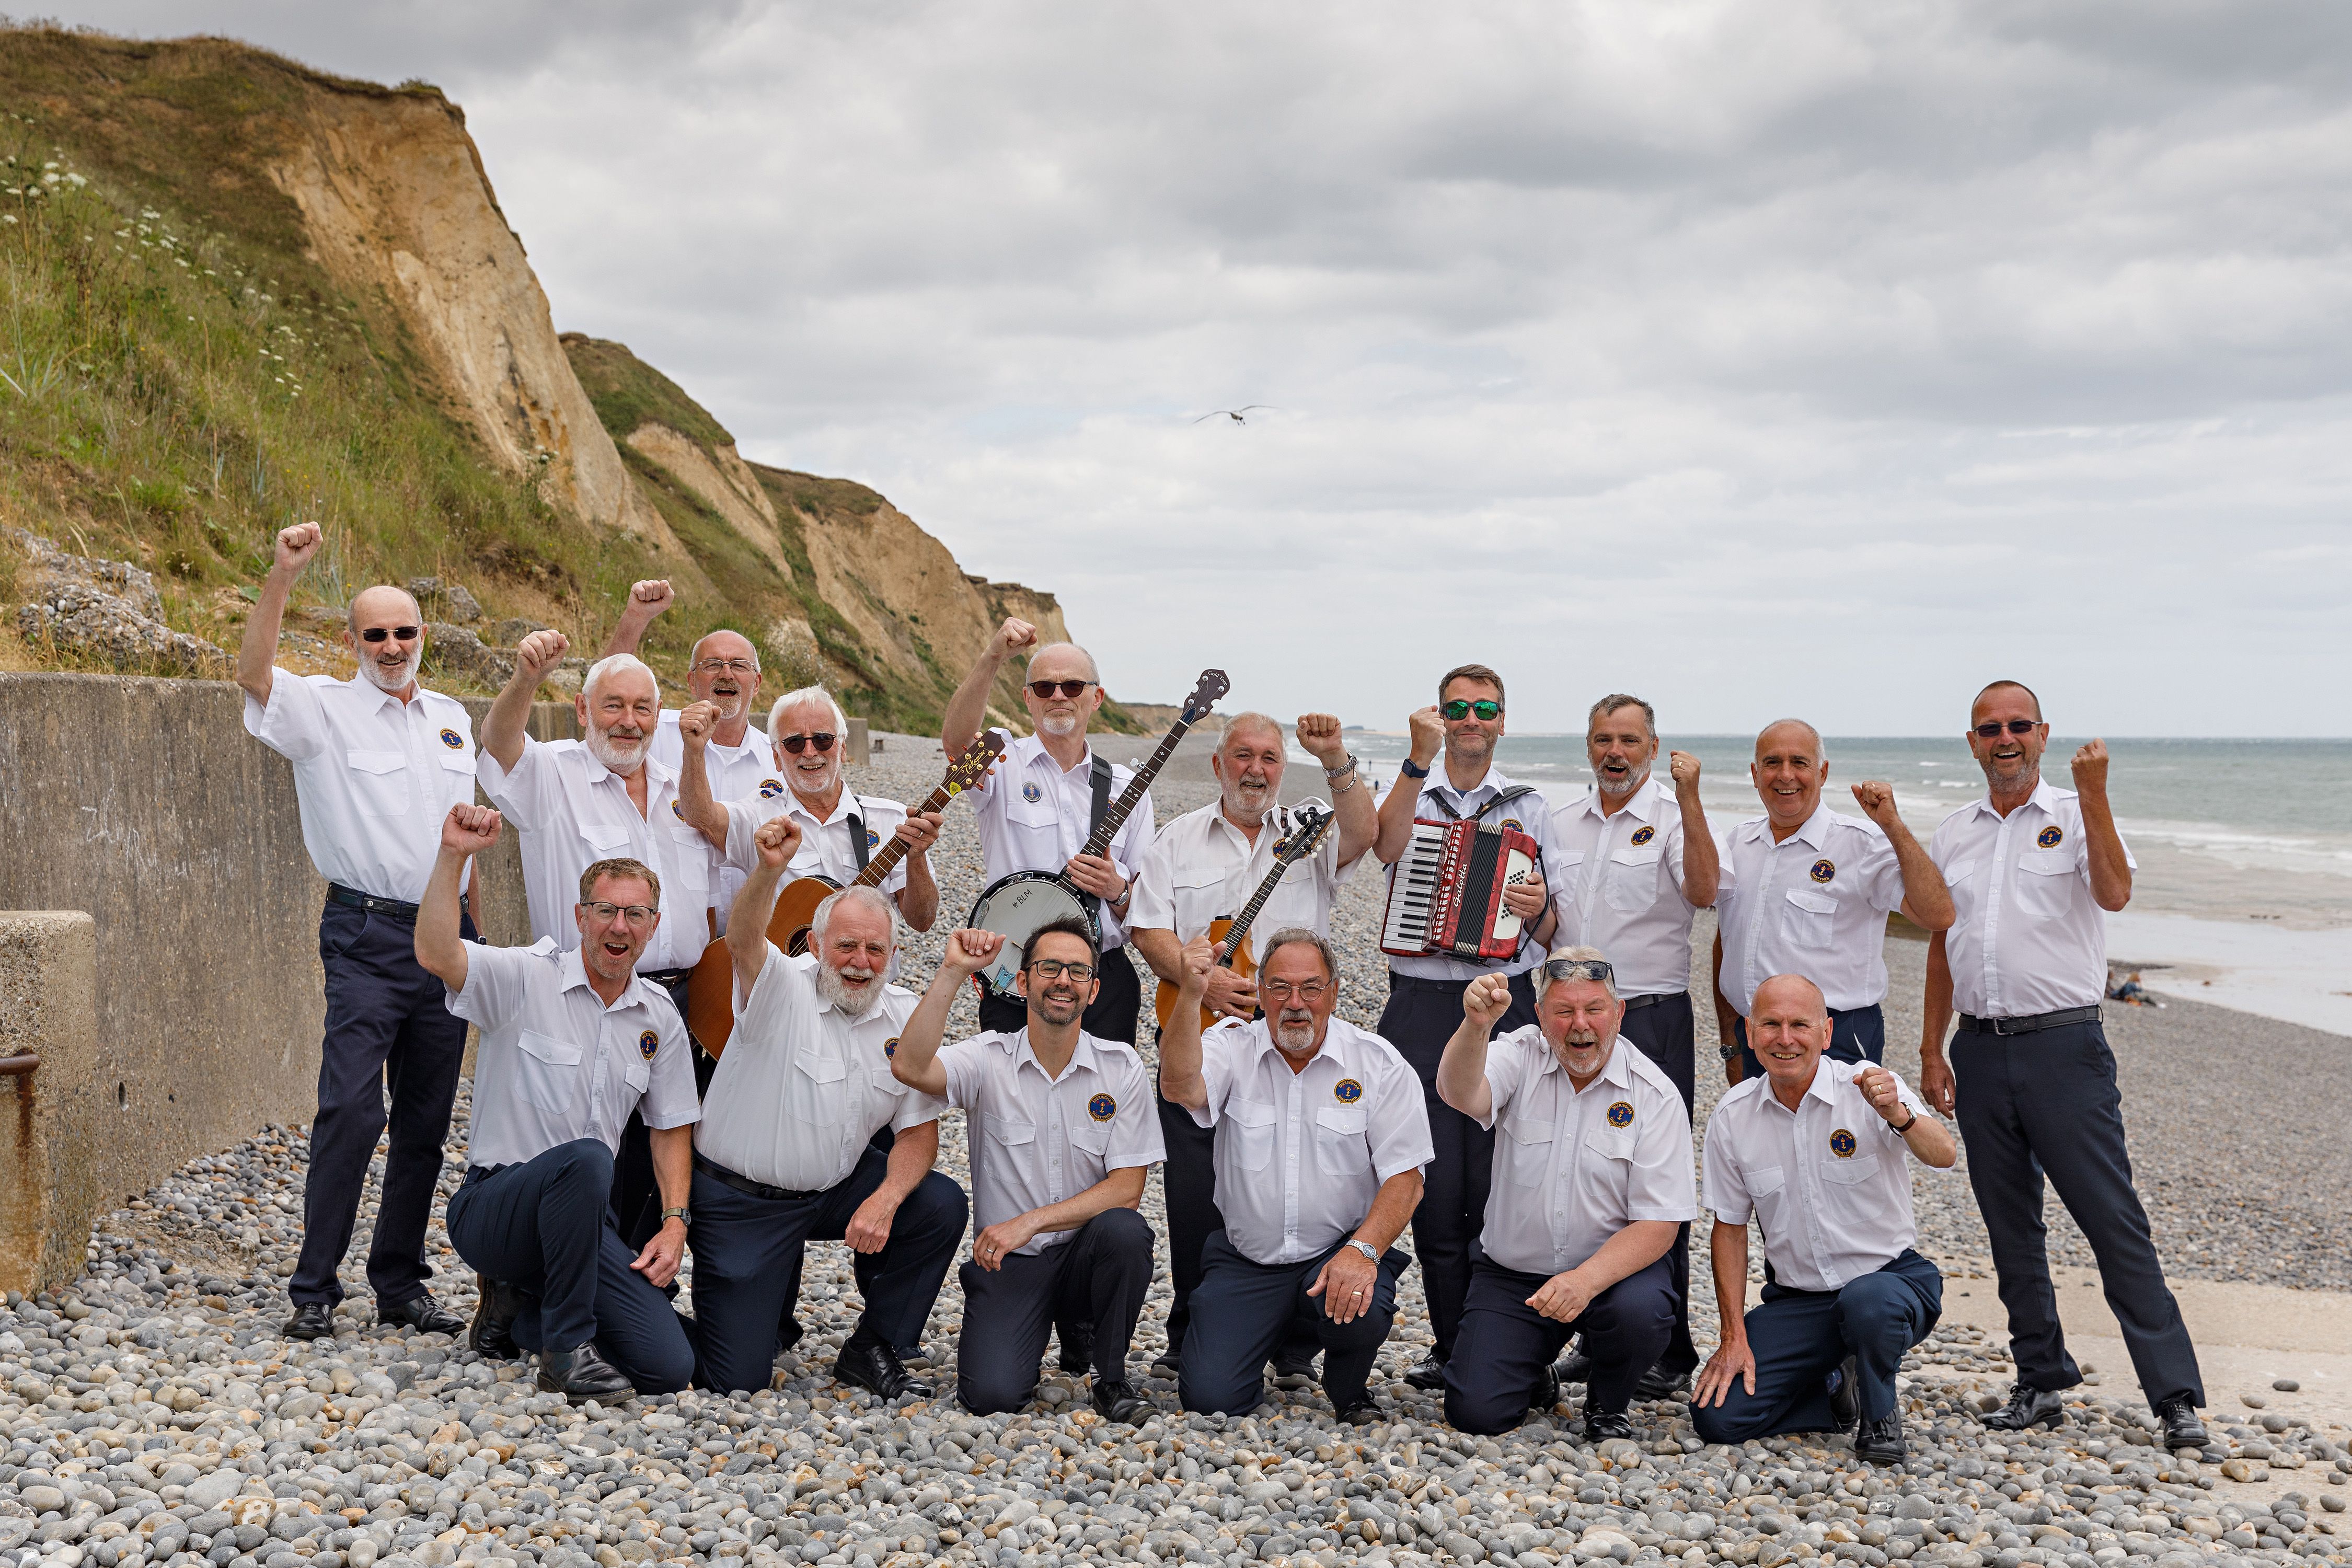 The Sheringham Shantymen pictured for the Queen's Jubilee